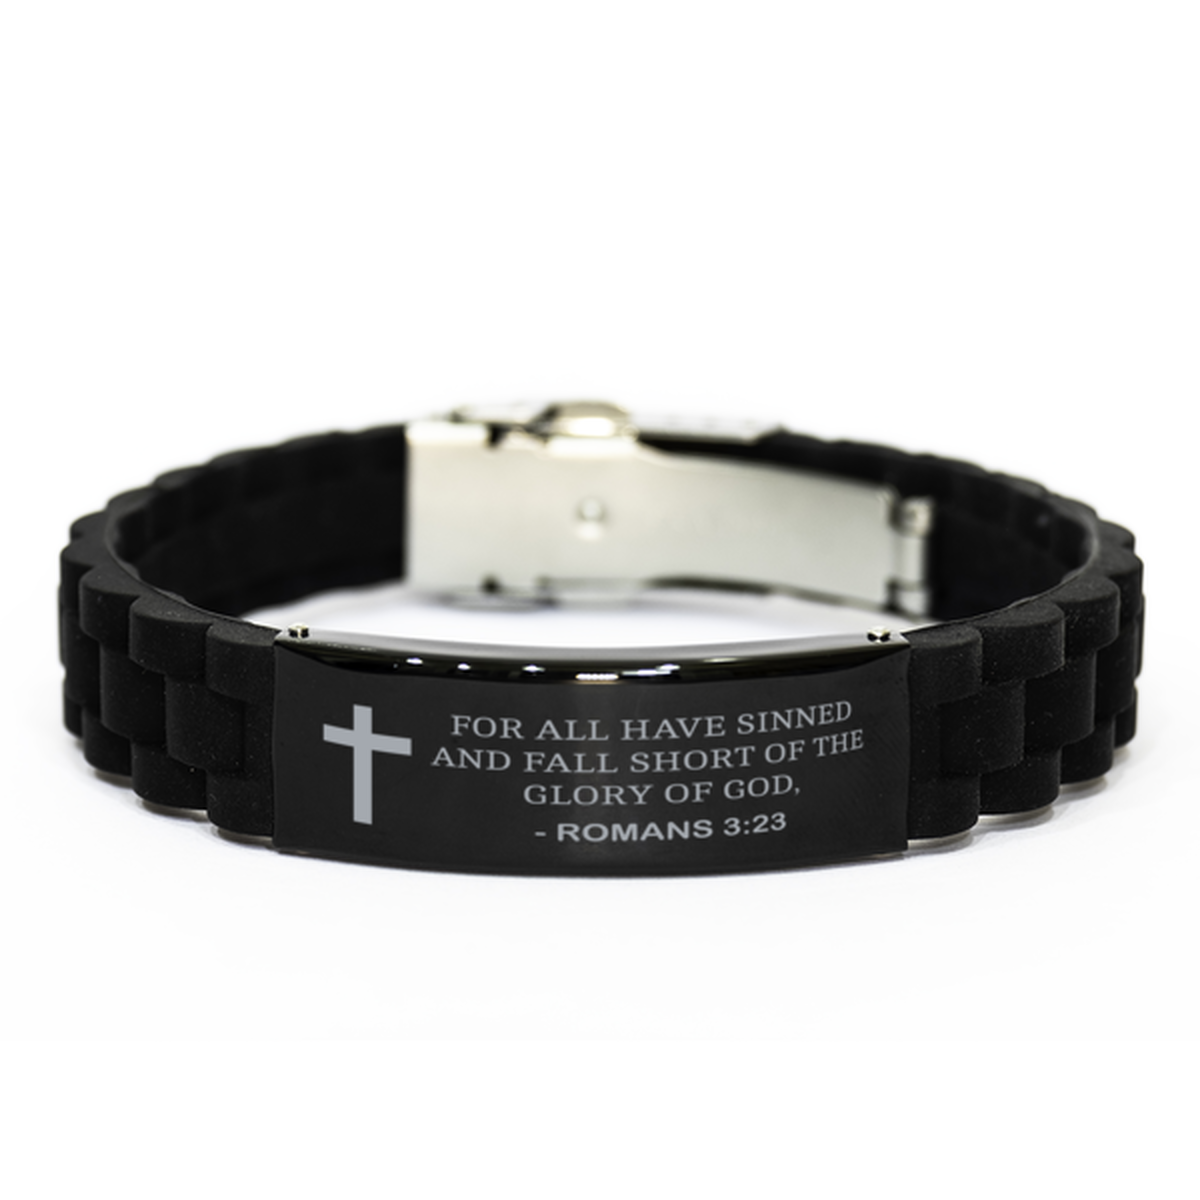 Bible Verse Black Bracelet,, Romans 3:23 For All Have Sinned And Fall Short Of The Glory, Inspirational Christian Gifts For Men Women